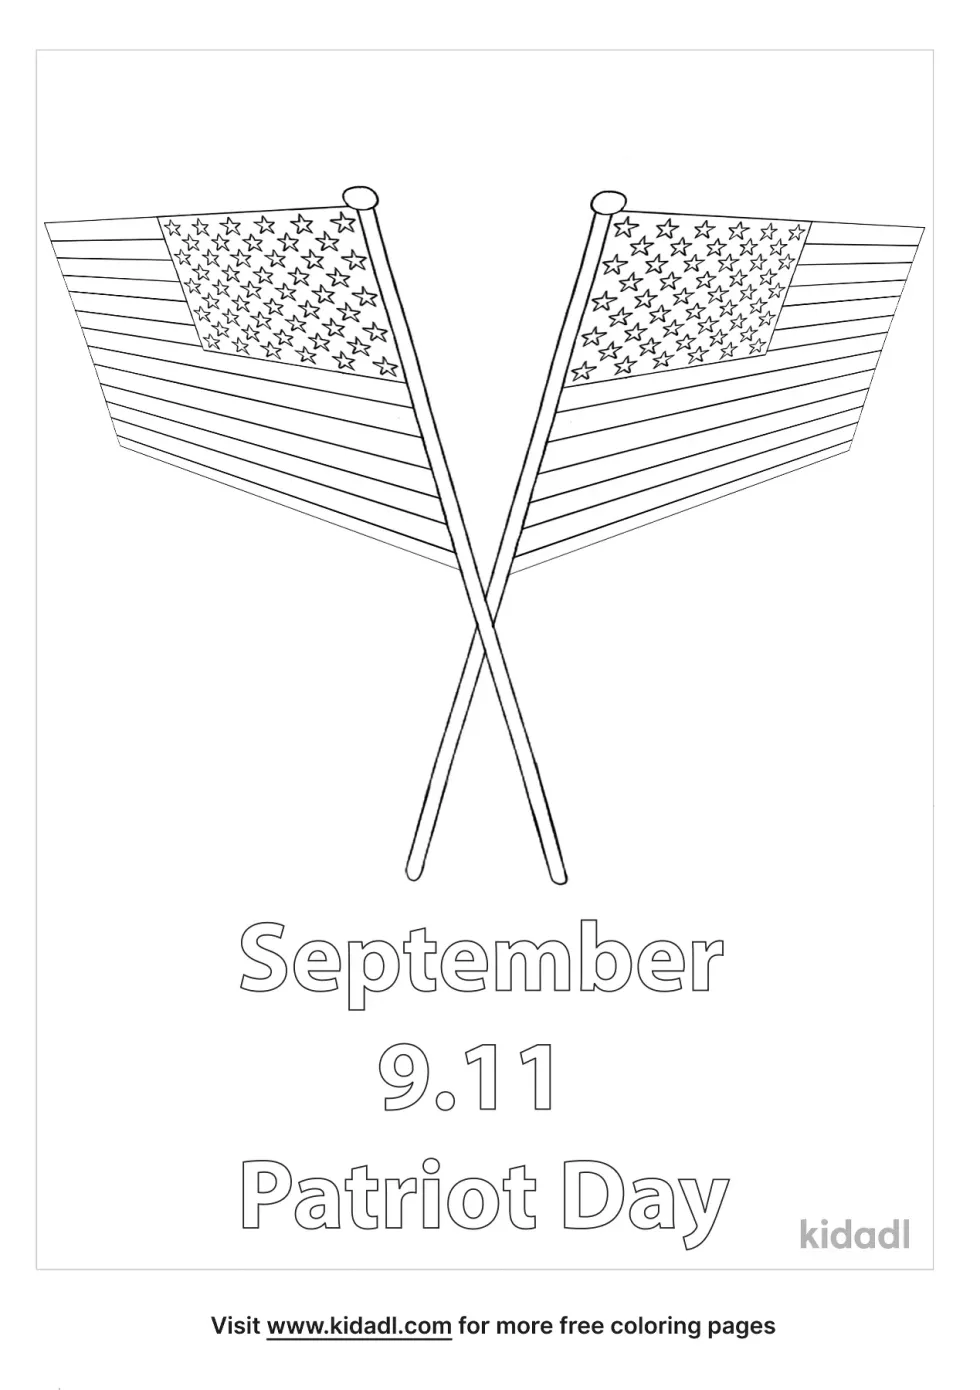 Patriot Day Coloring Page